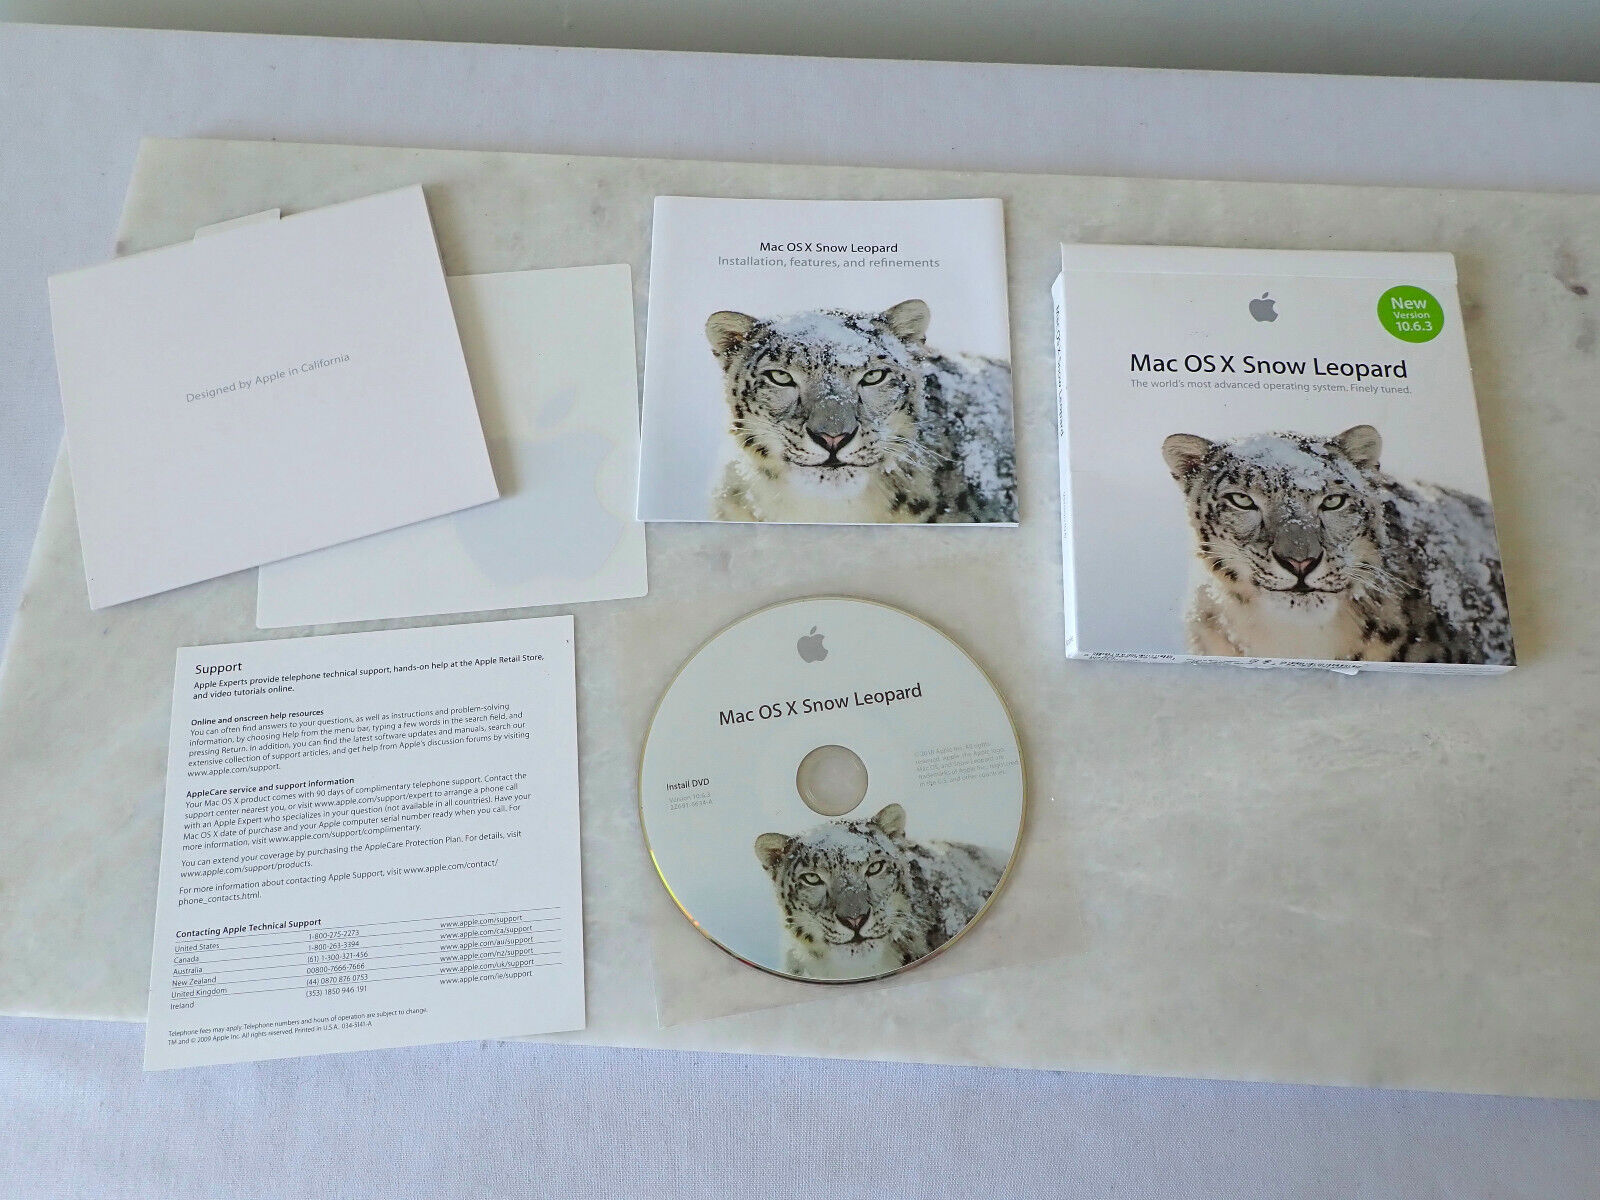 Apple Snow Leopard Mac OS X 10.6.3 Operation System NEW with Orig Inserts Box